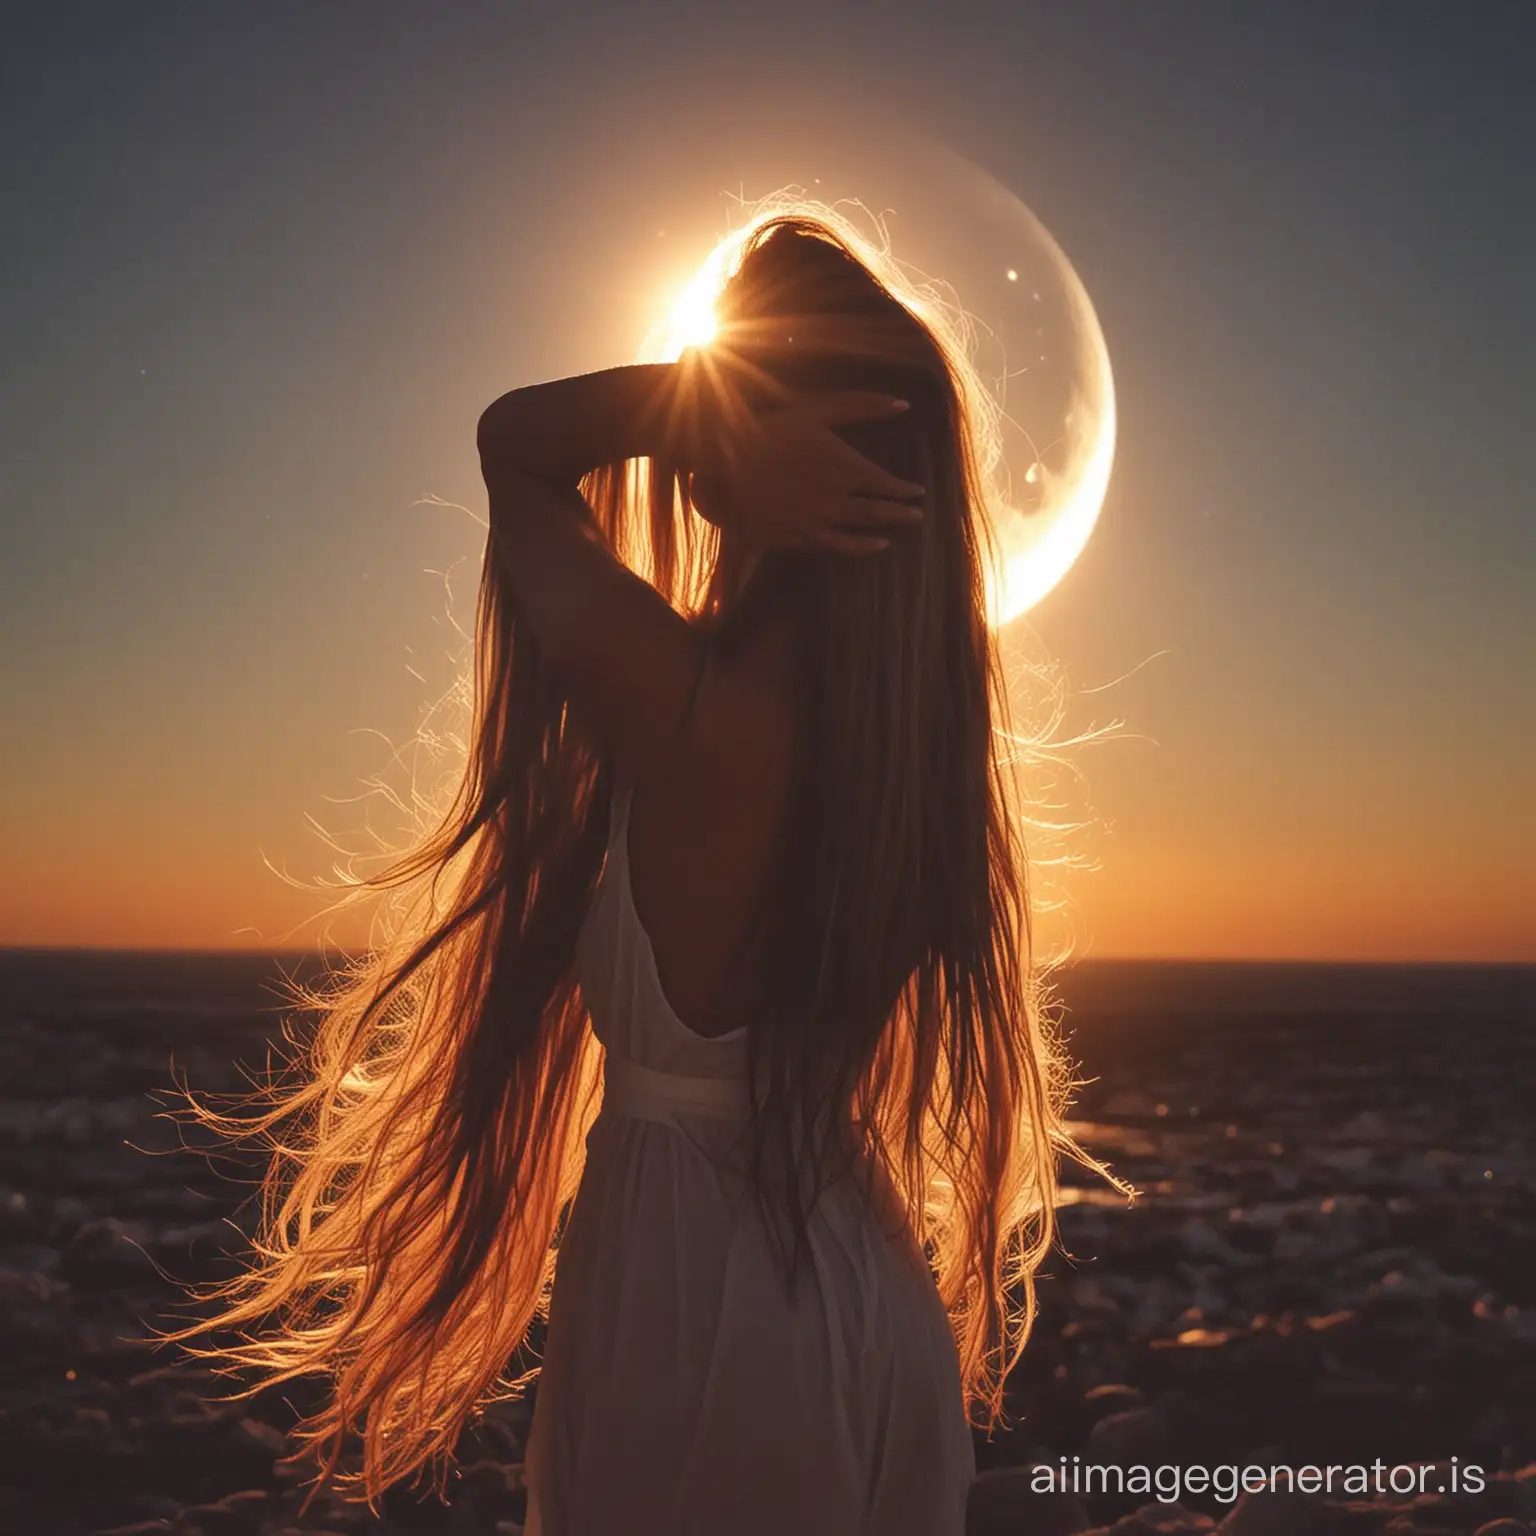 Luminous-Night-Sky-with-Ethereal-Goddess-Embracing-the-Moon